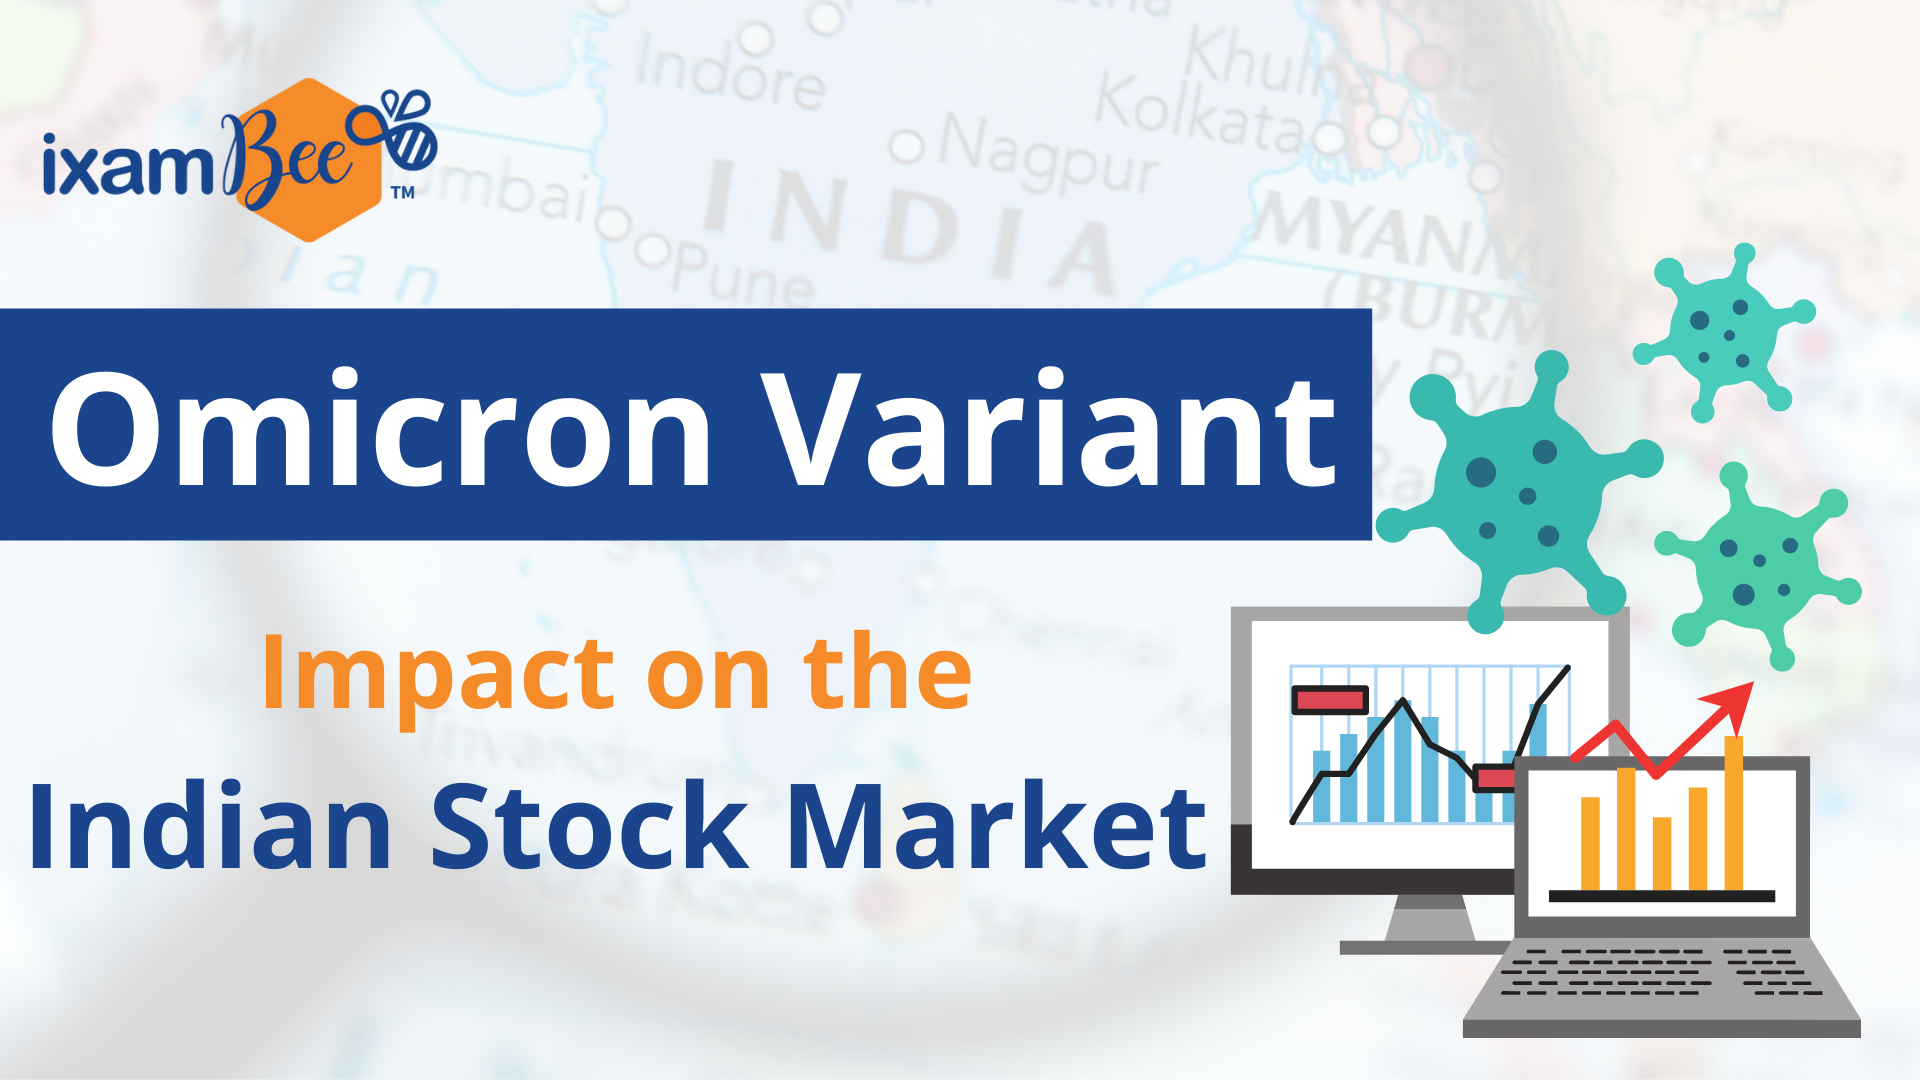 Omicron Variant: Impact on the Indian Stock Market